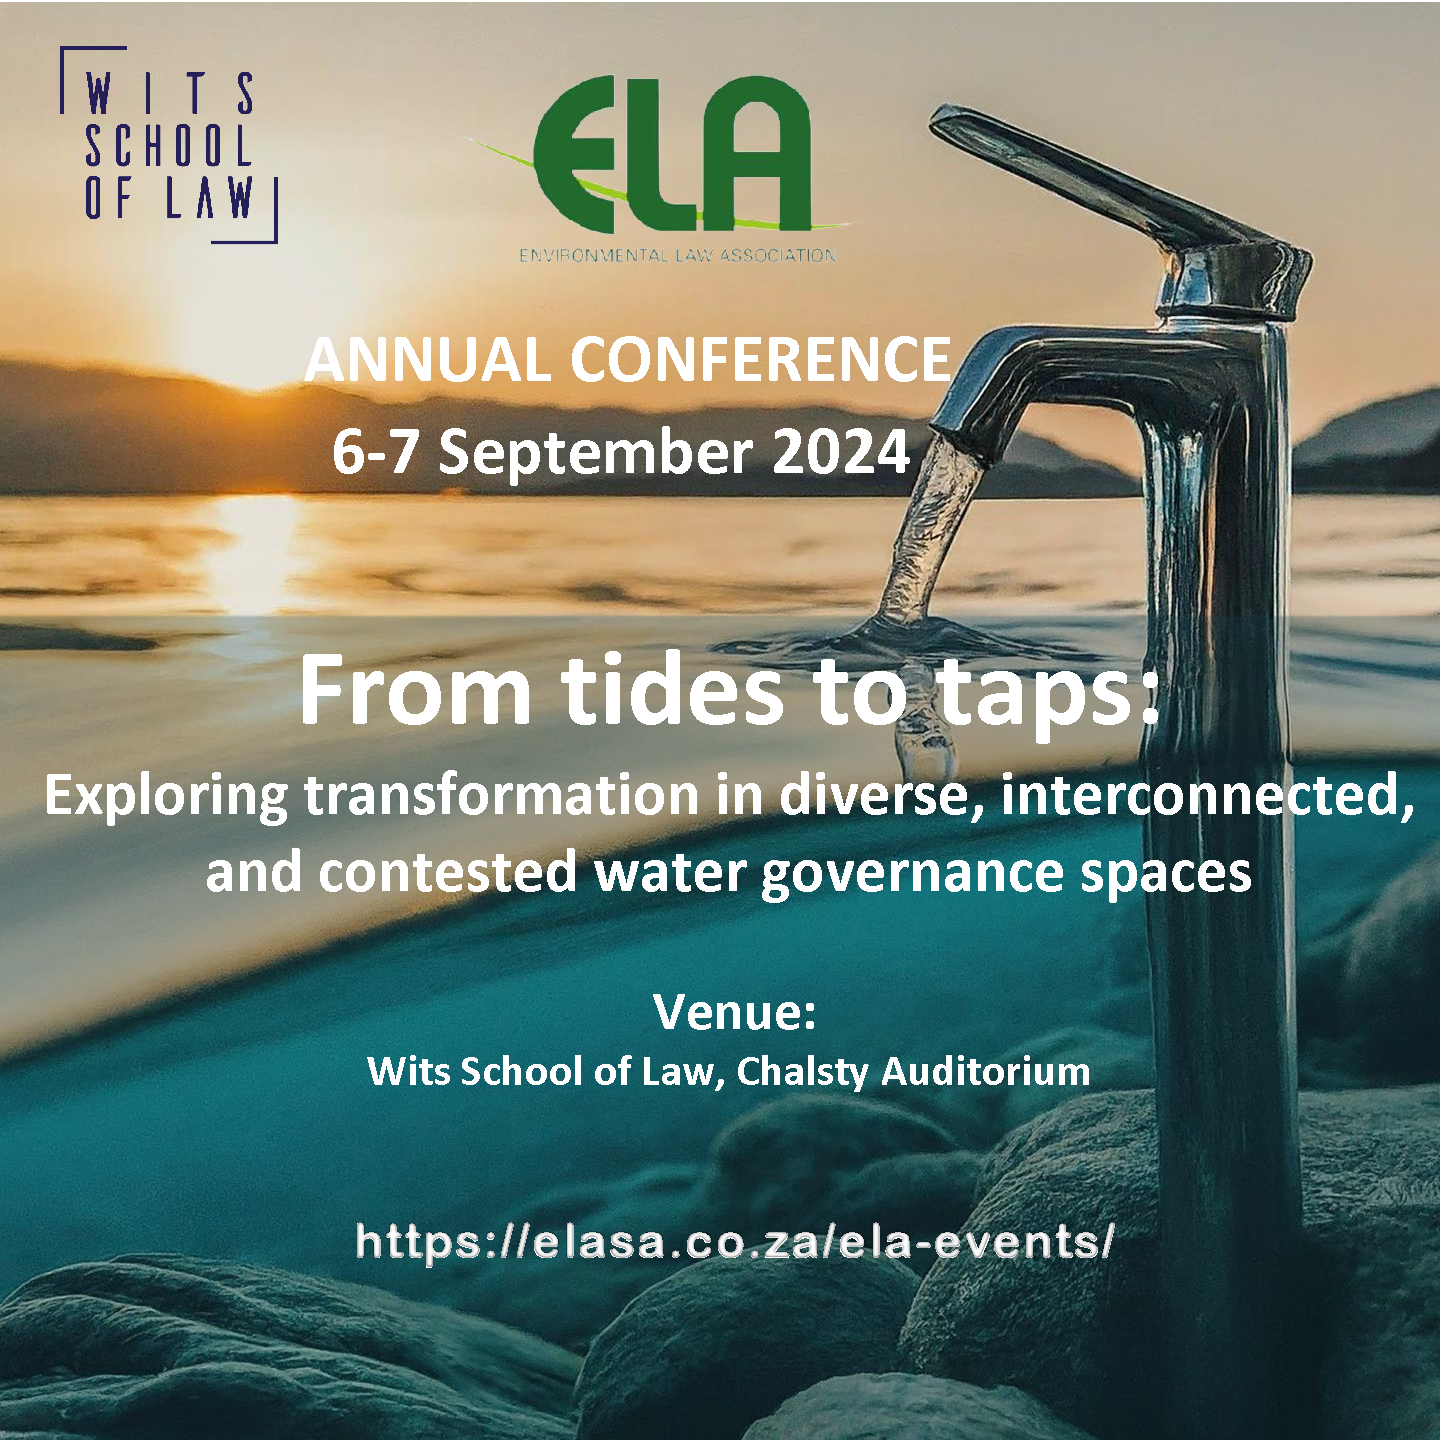 Annual Conference 2024 - From tides to taps